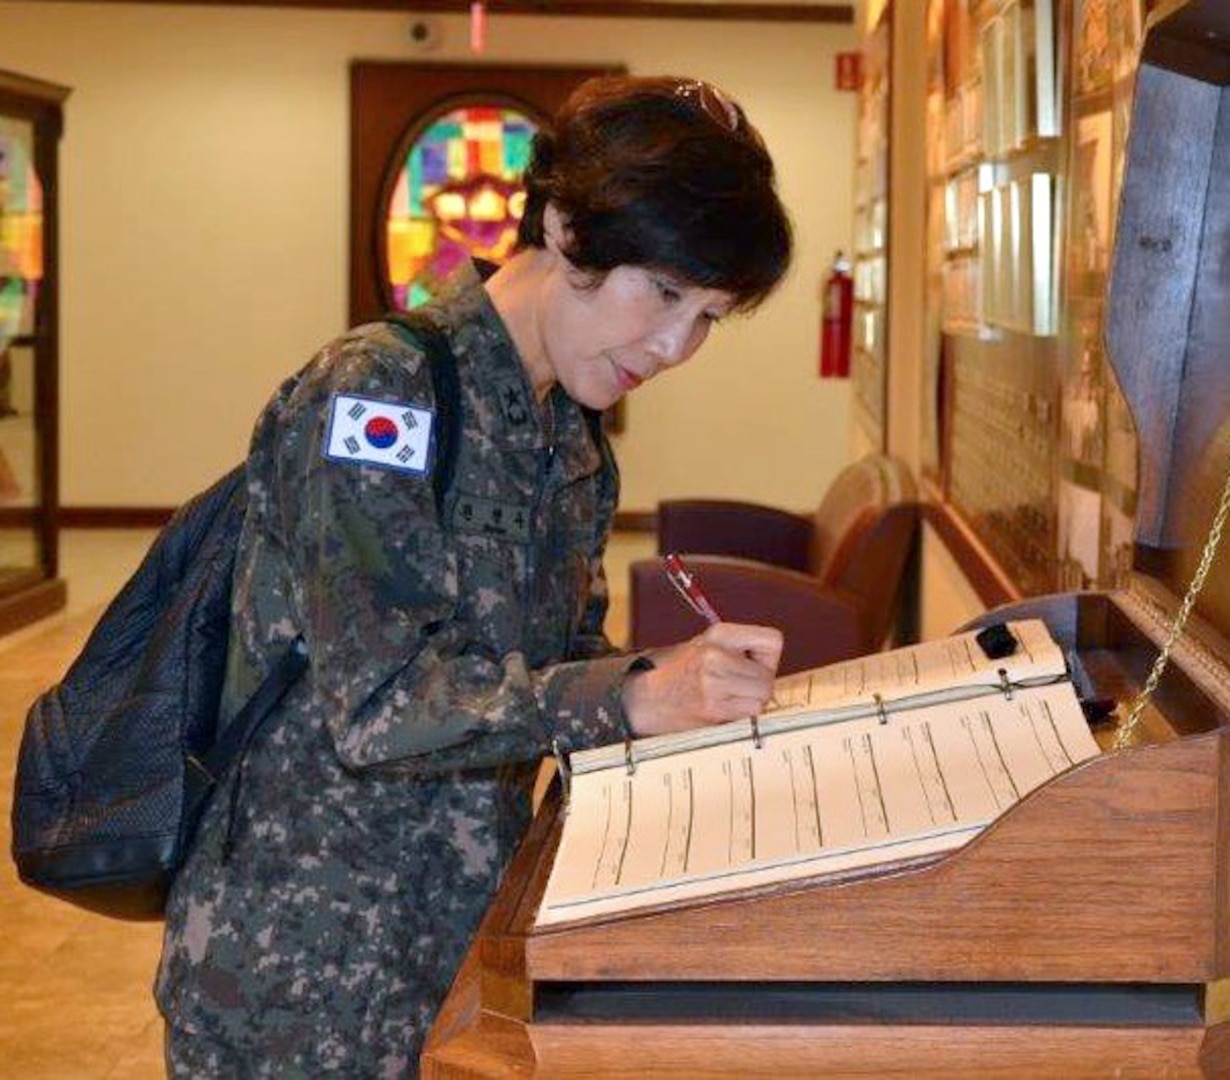 Republic of Korea Army Brig. Gen. Myoung-ok Kwon, superintendent for the Korea Armed Forces Nursing Academy signs the distinguished visitor log book at the U.S. Army Medical Department Center & School, Health Readiness Center of Excellence’s International Military Student Office 22 years after she graduated from what is now the Captains Career Course at the HRCoE at Joint Base San Antonio-Fort Sam Houston.